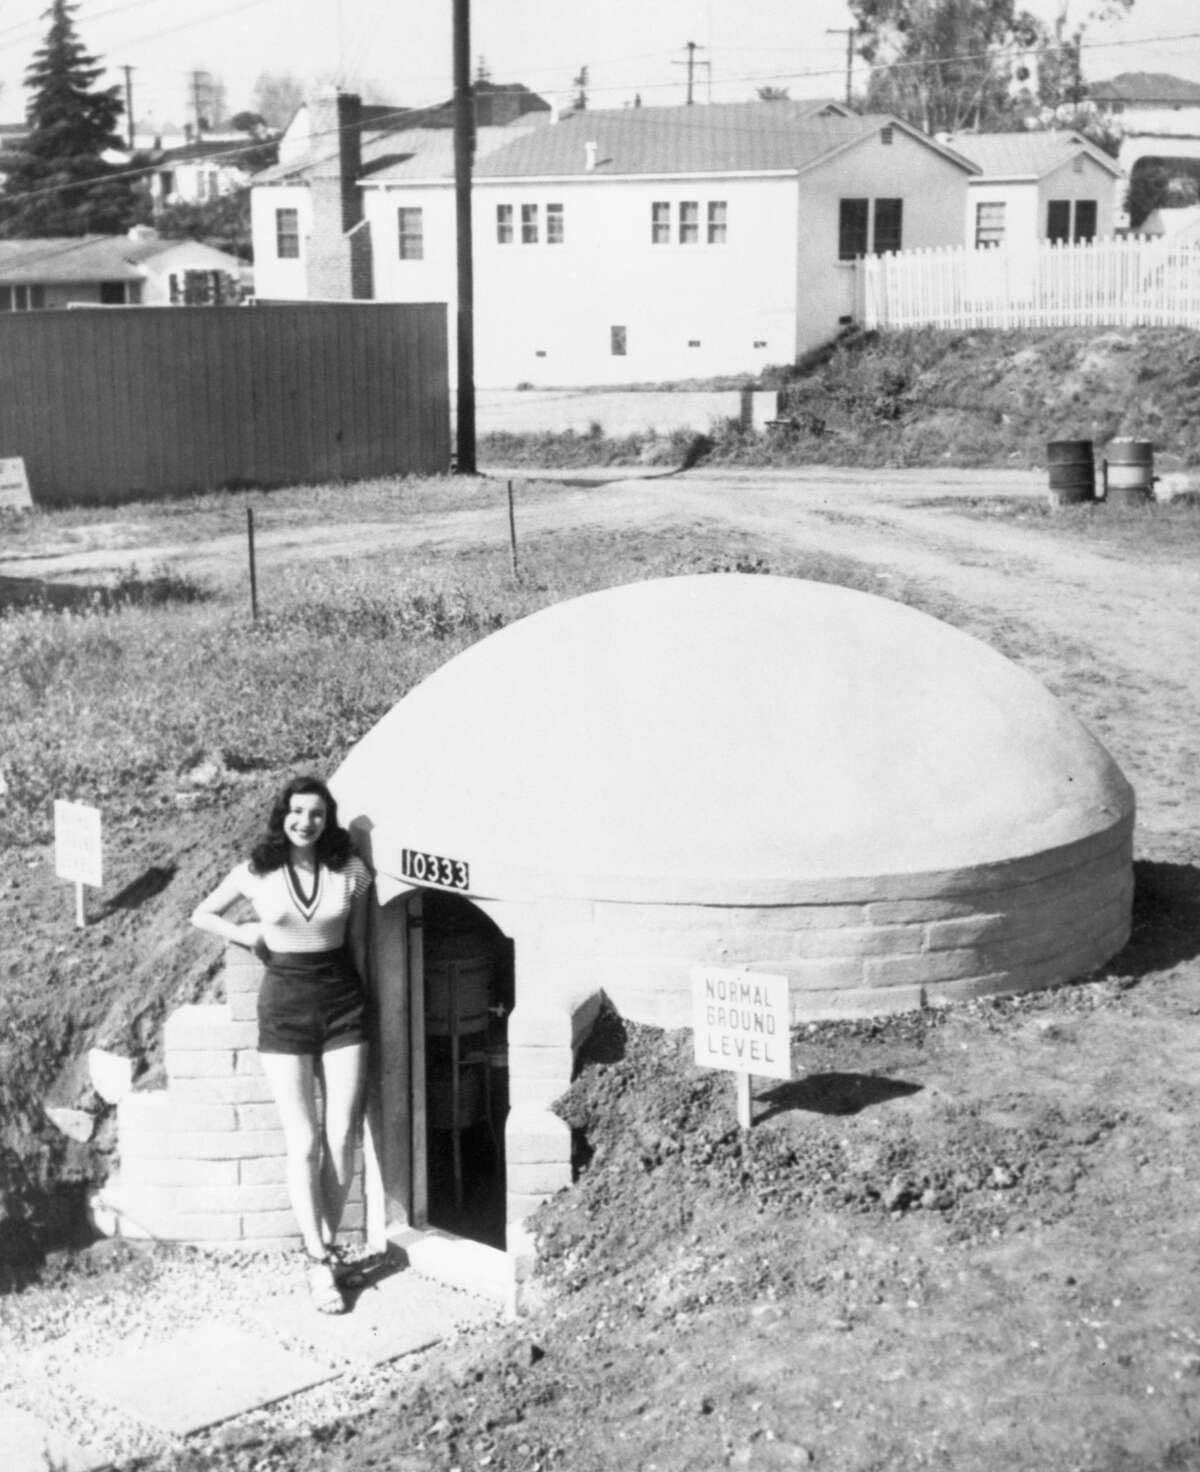 most cities across the country required people to build and maintain fallout shelters.